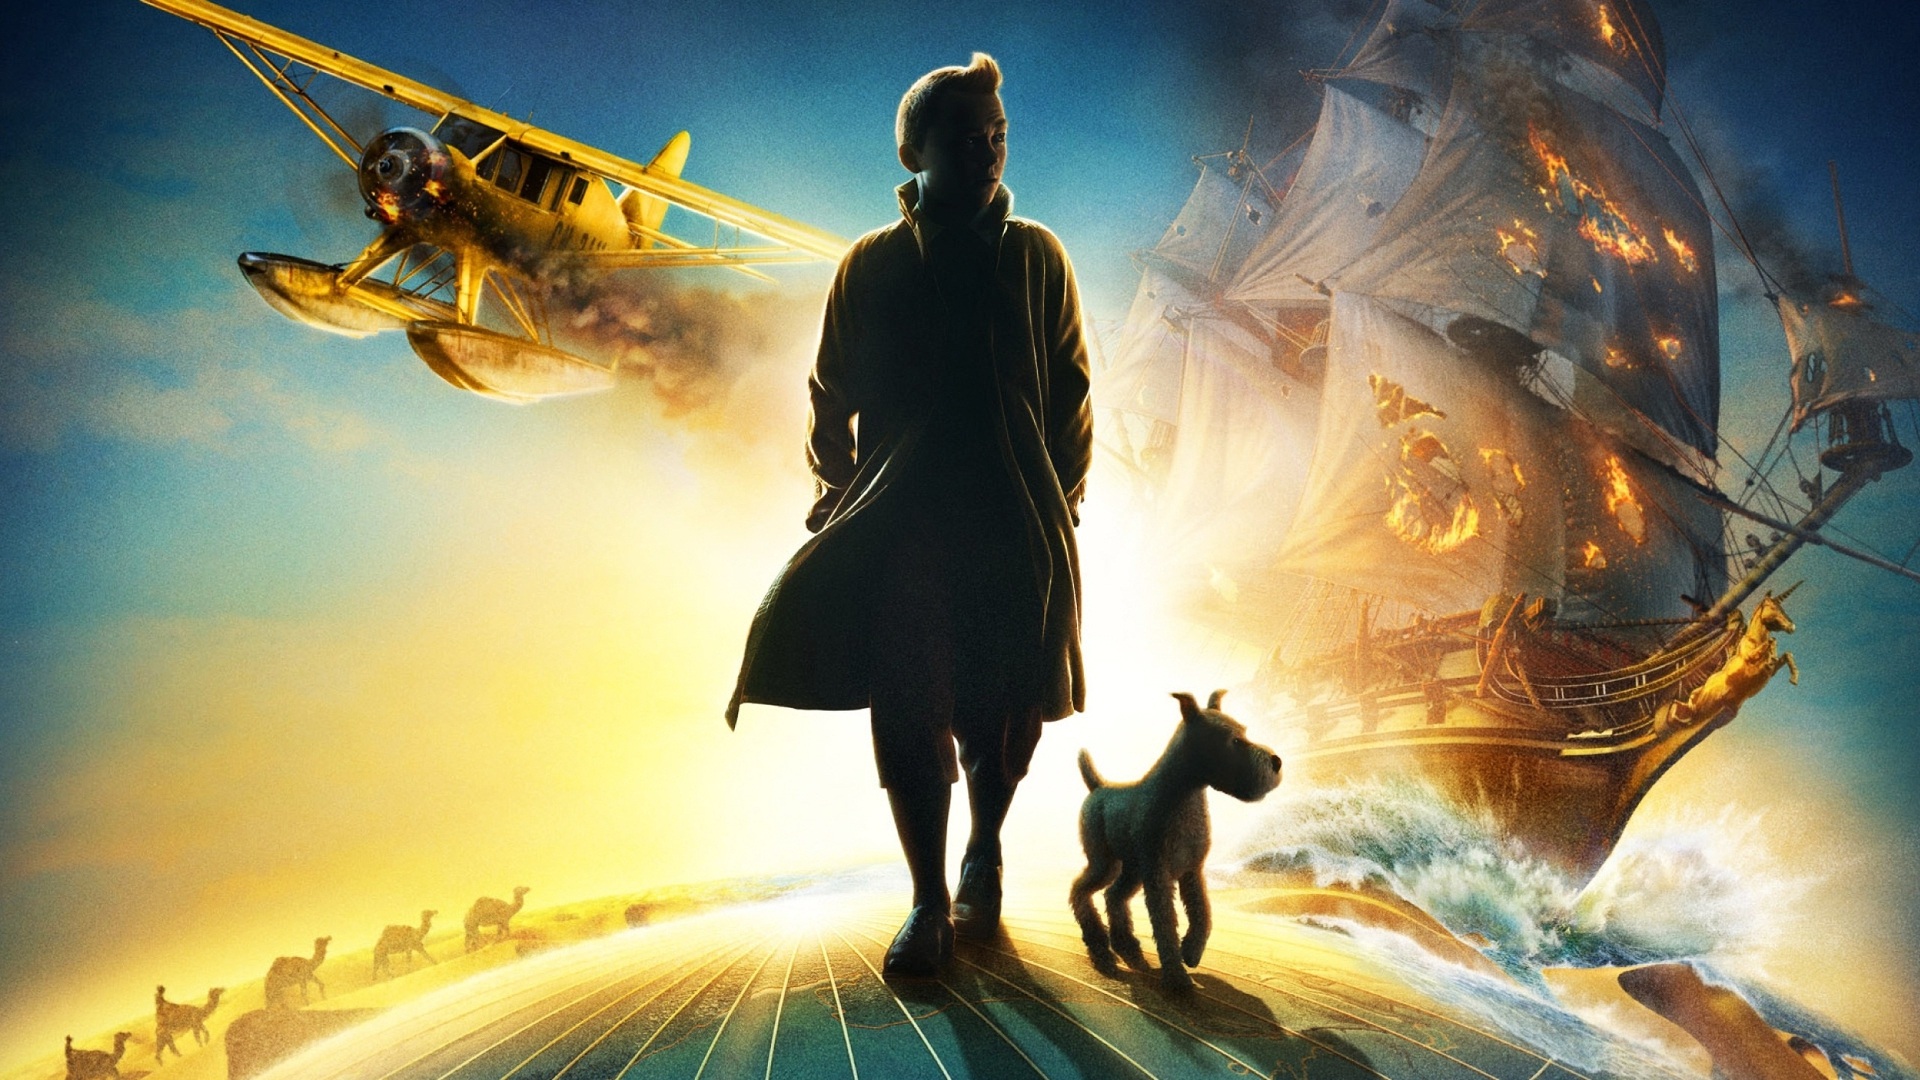 Wallpaper The Adventures of Tintin, 2011 movie, poster